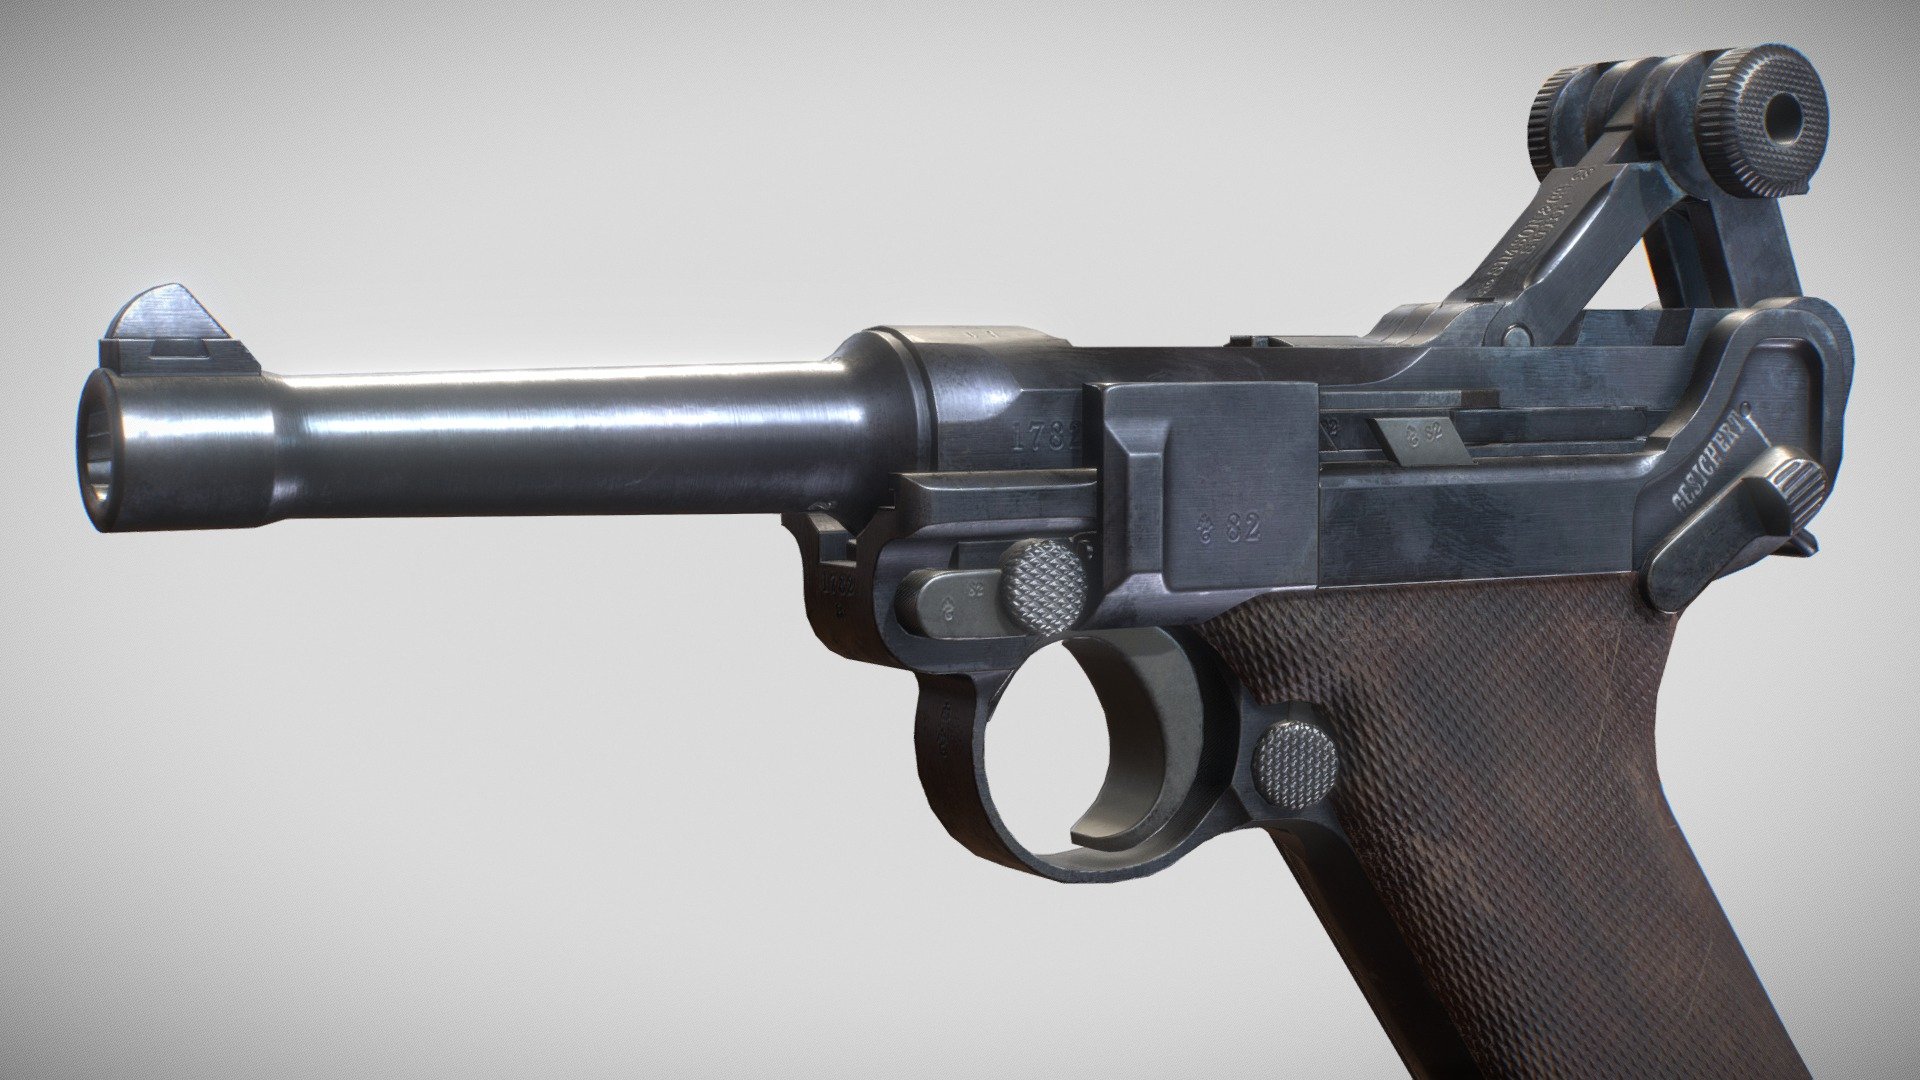 Lowpoly and game ready interwar Luger P08 version for German police and Reichswehr - Luger P08 Police version by Simson & Suhl - 3D model by MrKenshi 3d model